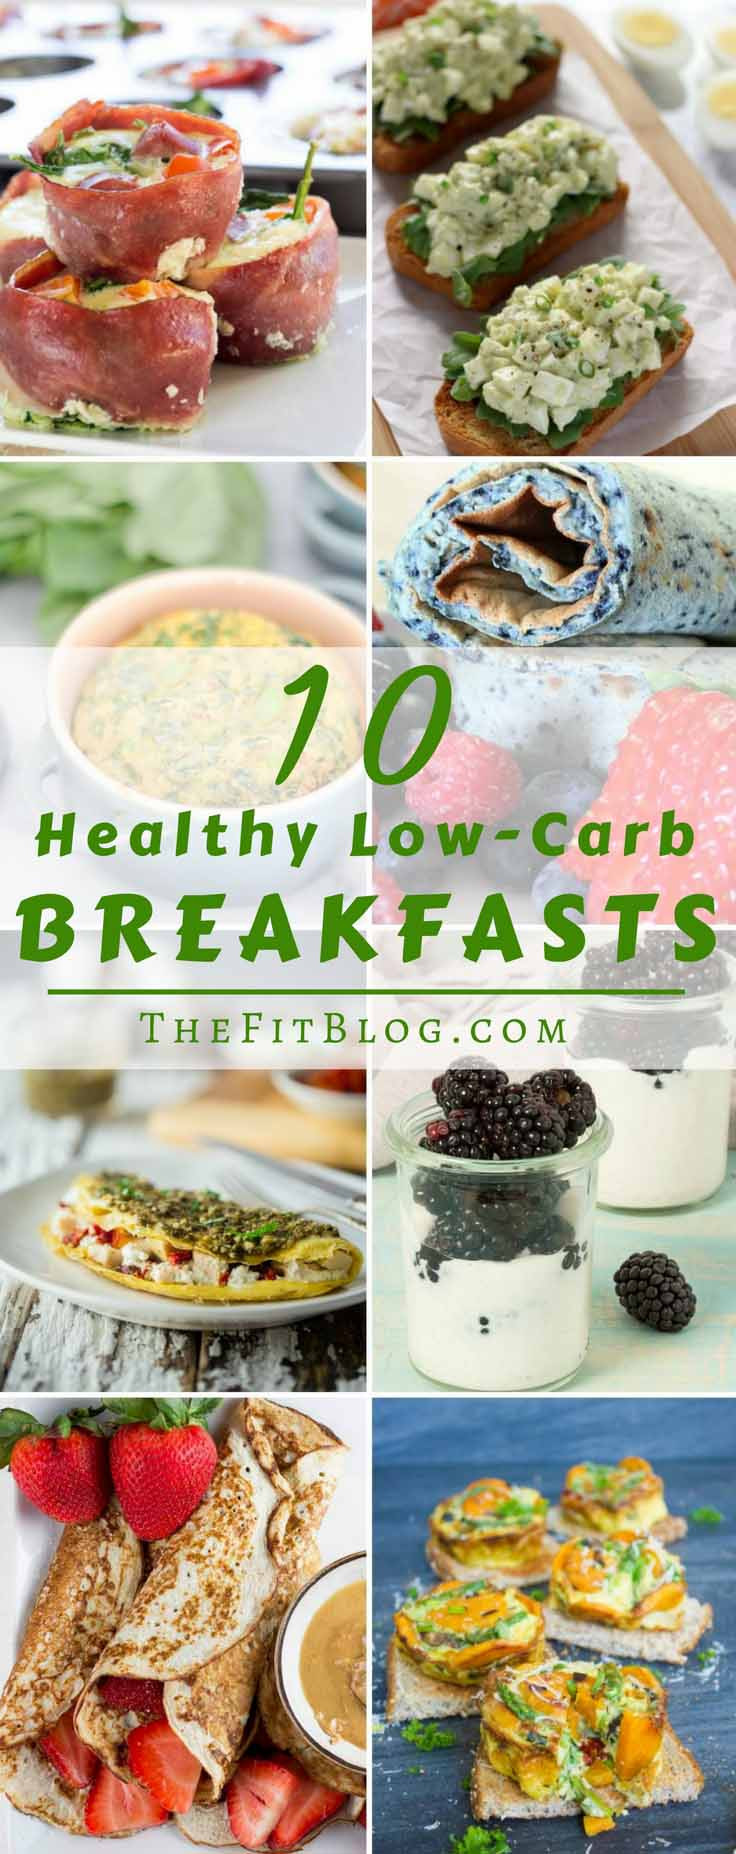 Healthy Low Carb Breakfast Ideas
 10 Healthy Low Carb Breakfast Recipes